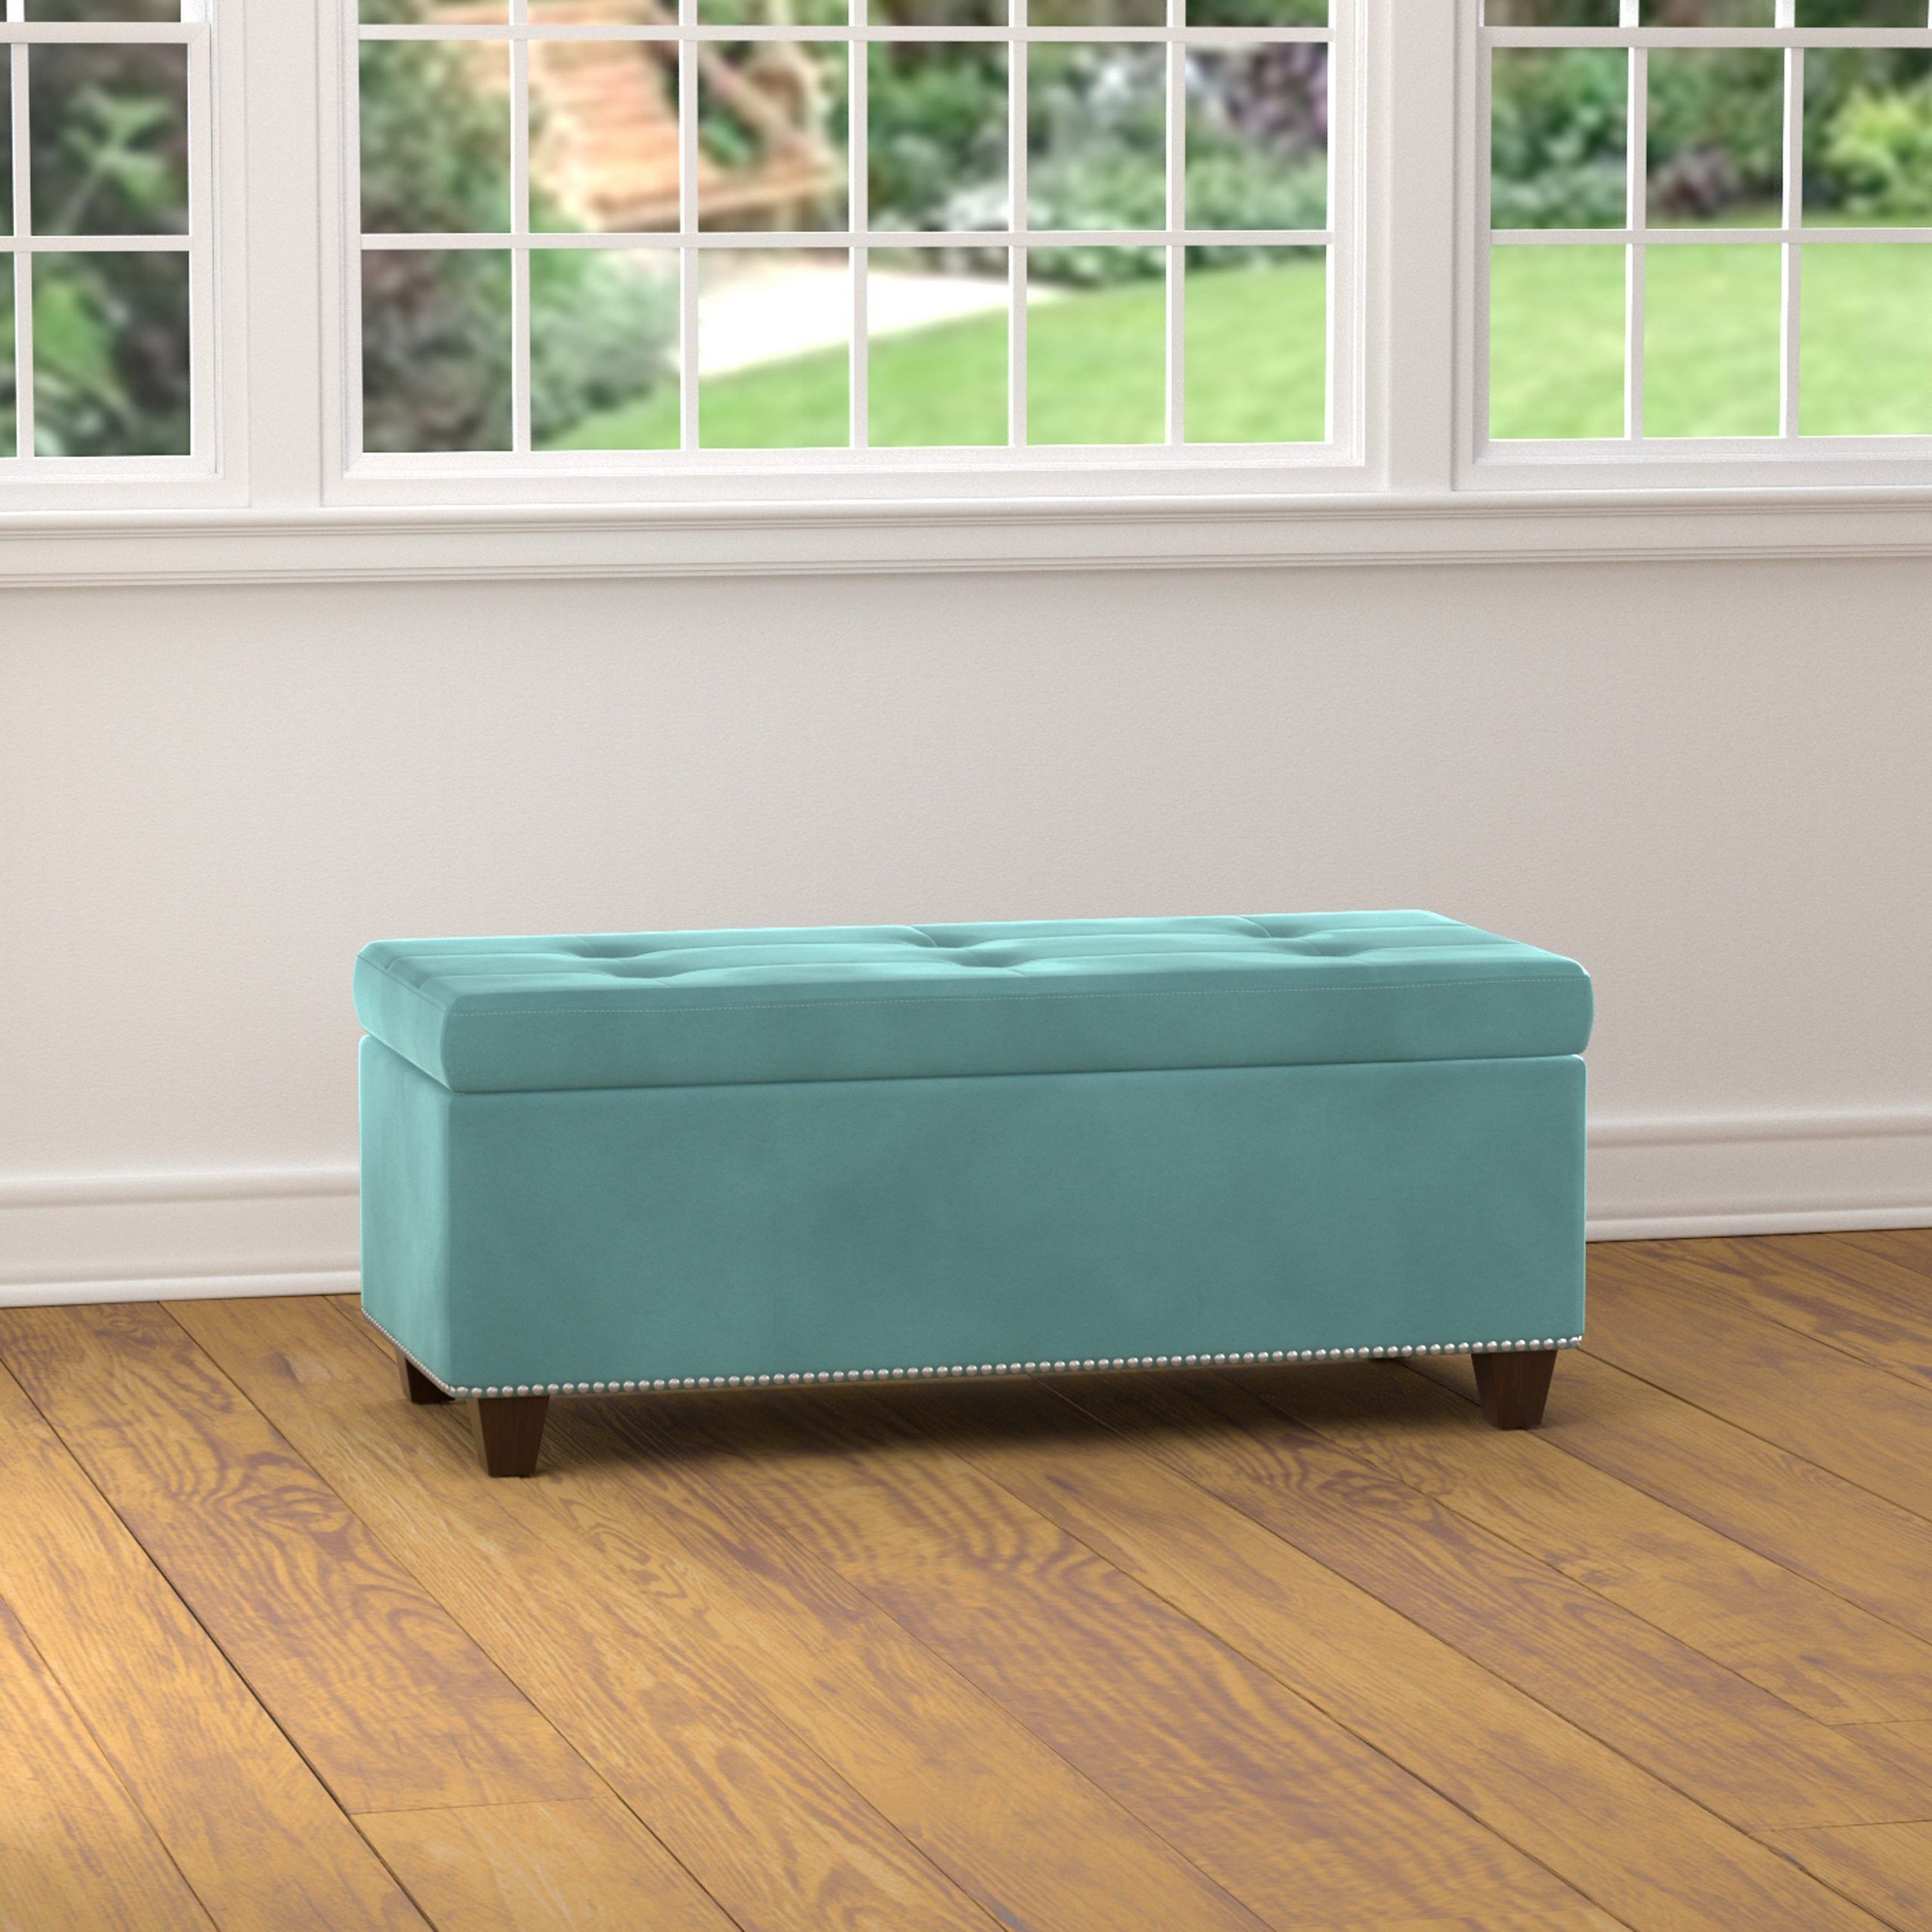 Shop Handy Living Tufted Turquoise Blue Velvet Bench Storage Ottoman Throughout Blue Fabric Storage Ottomans (View 9 of 20)